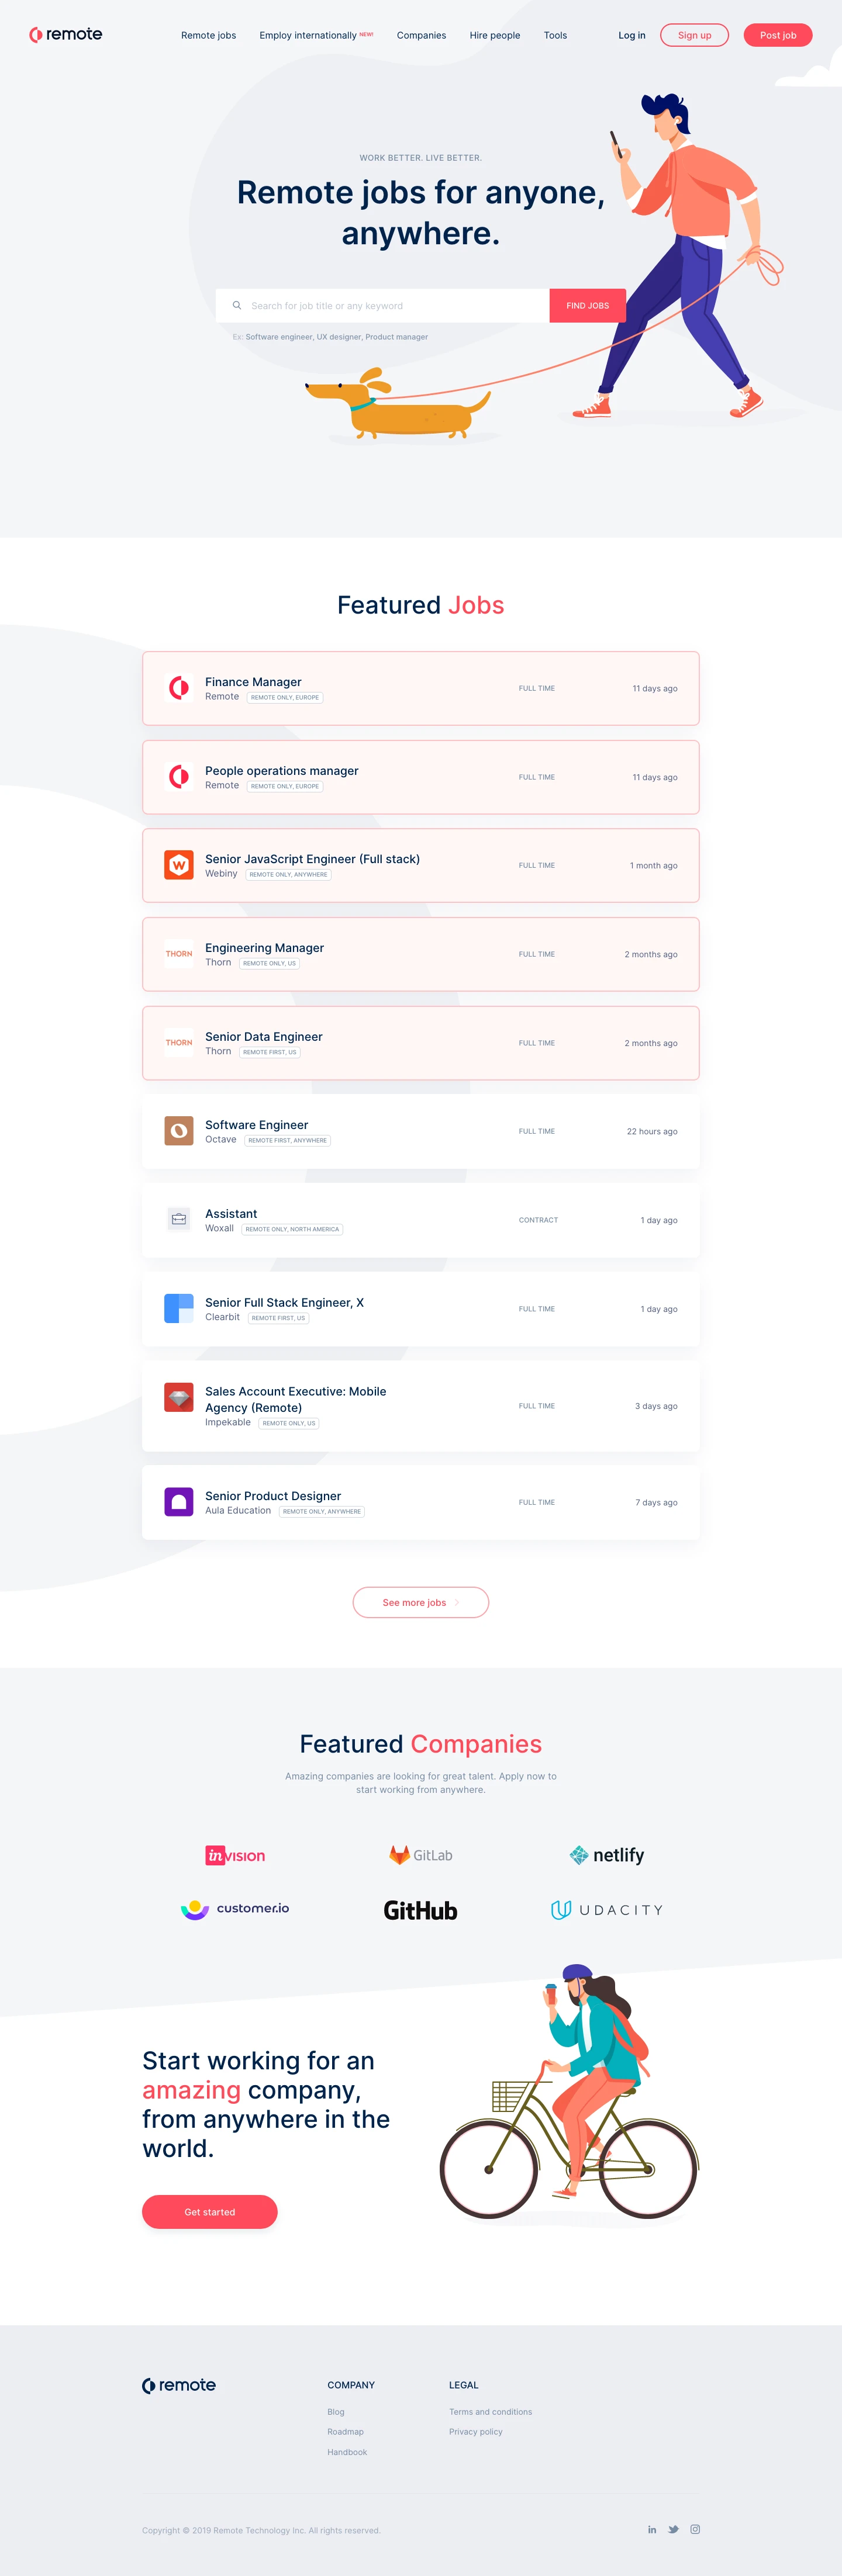 Remote Landing Page Example: Embrace remote work! Find amazing remote jobs at the world's greatest distributed companies.